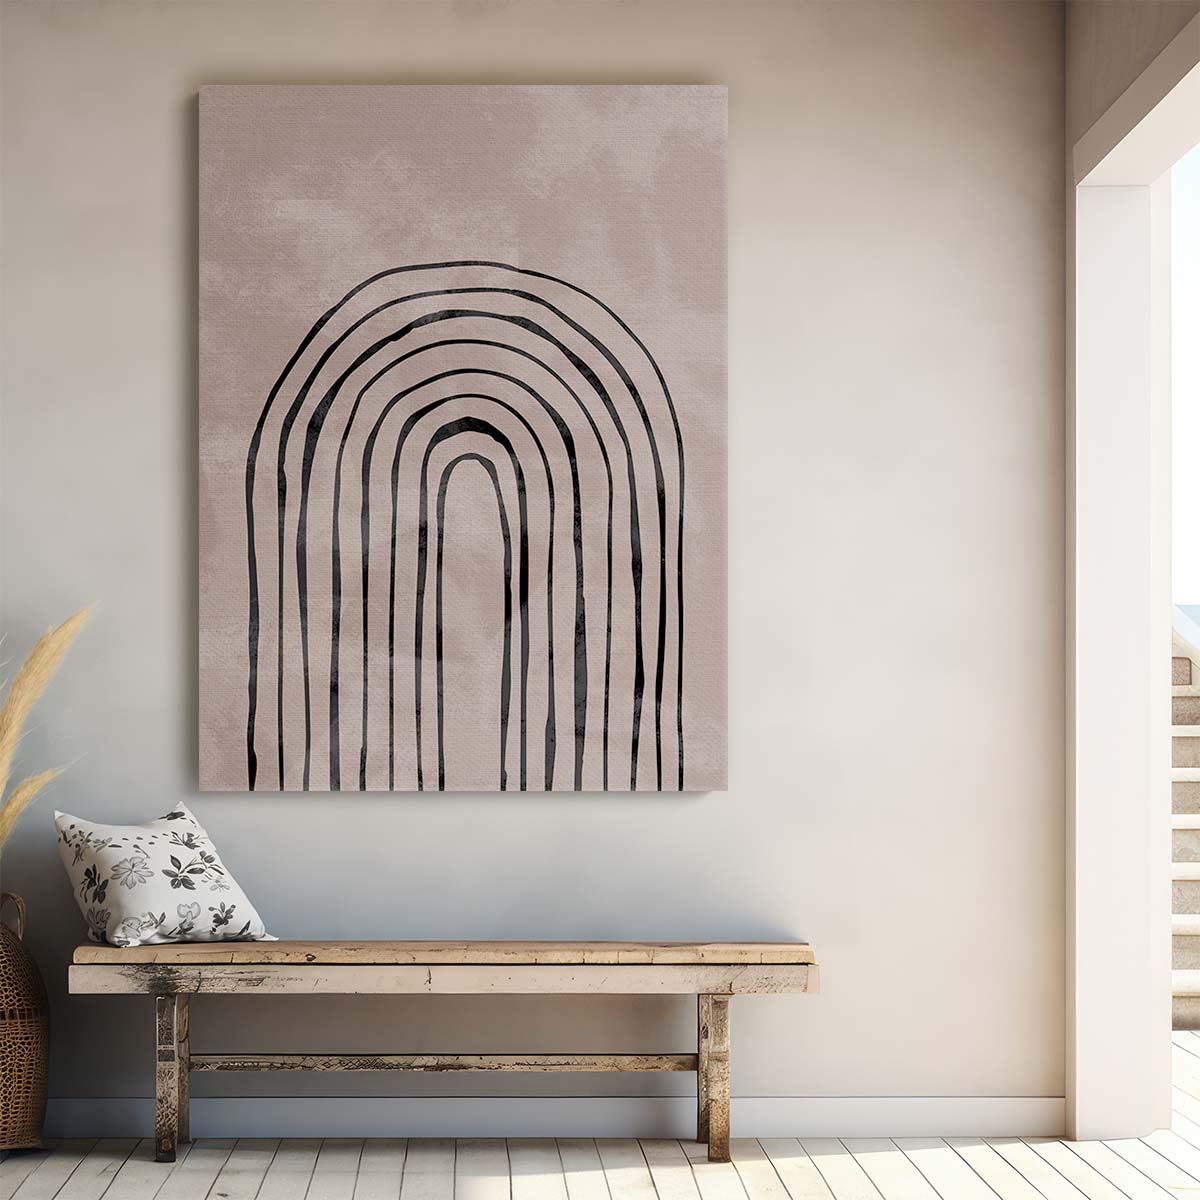 Abstract Geometric Arch Illustration - Beige Symmetrical Graphic Wall Art by Luxuriance Designs, made in USA